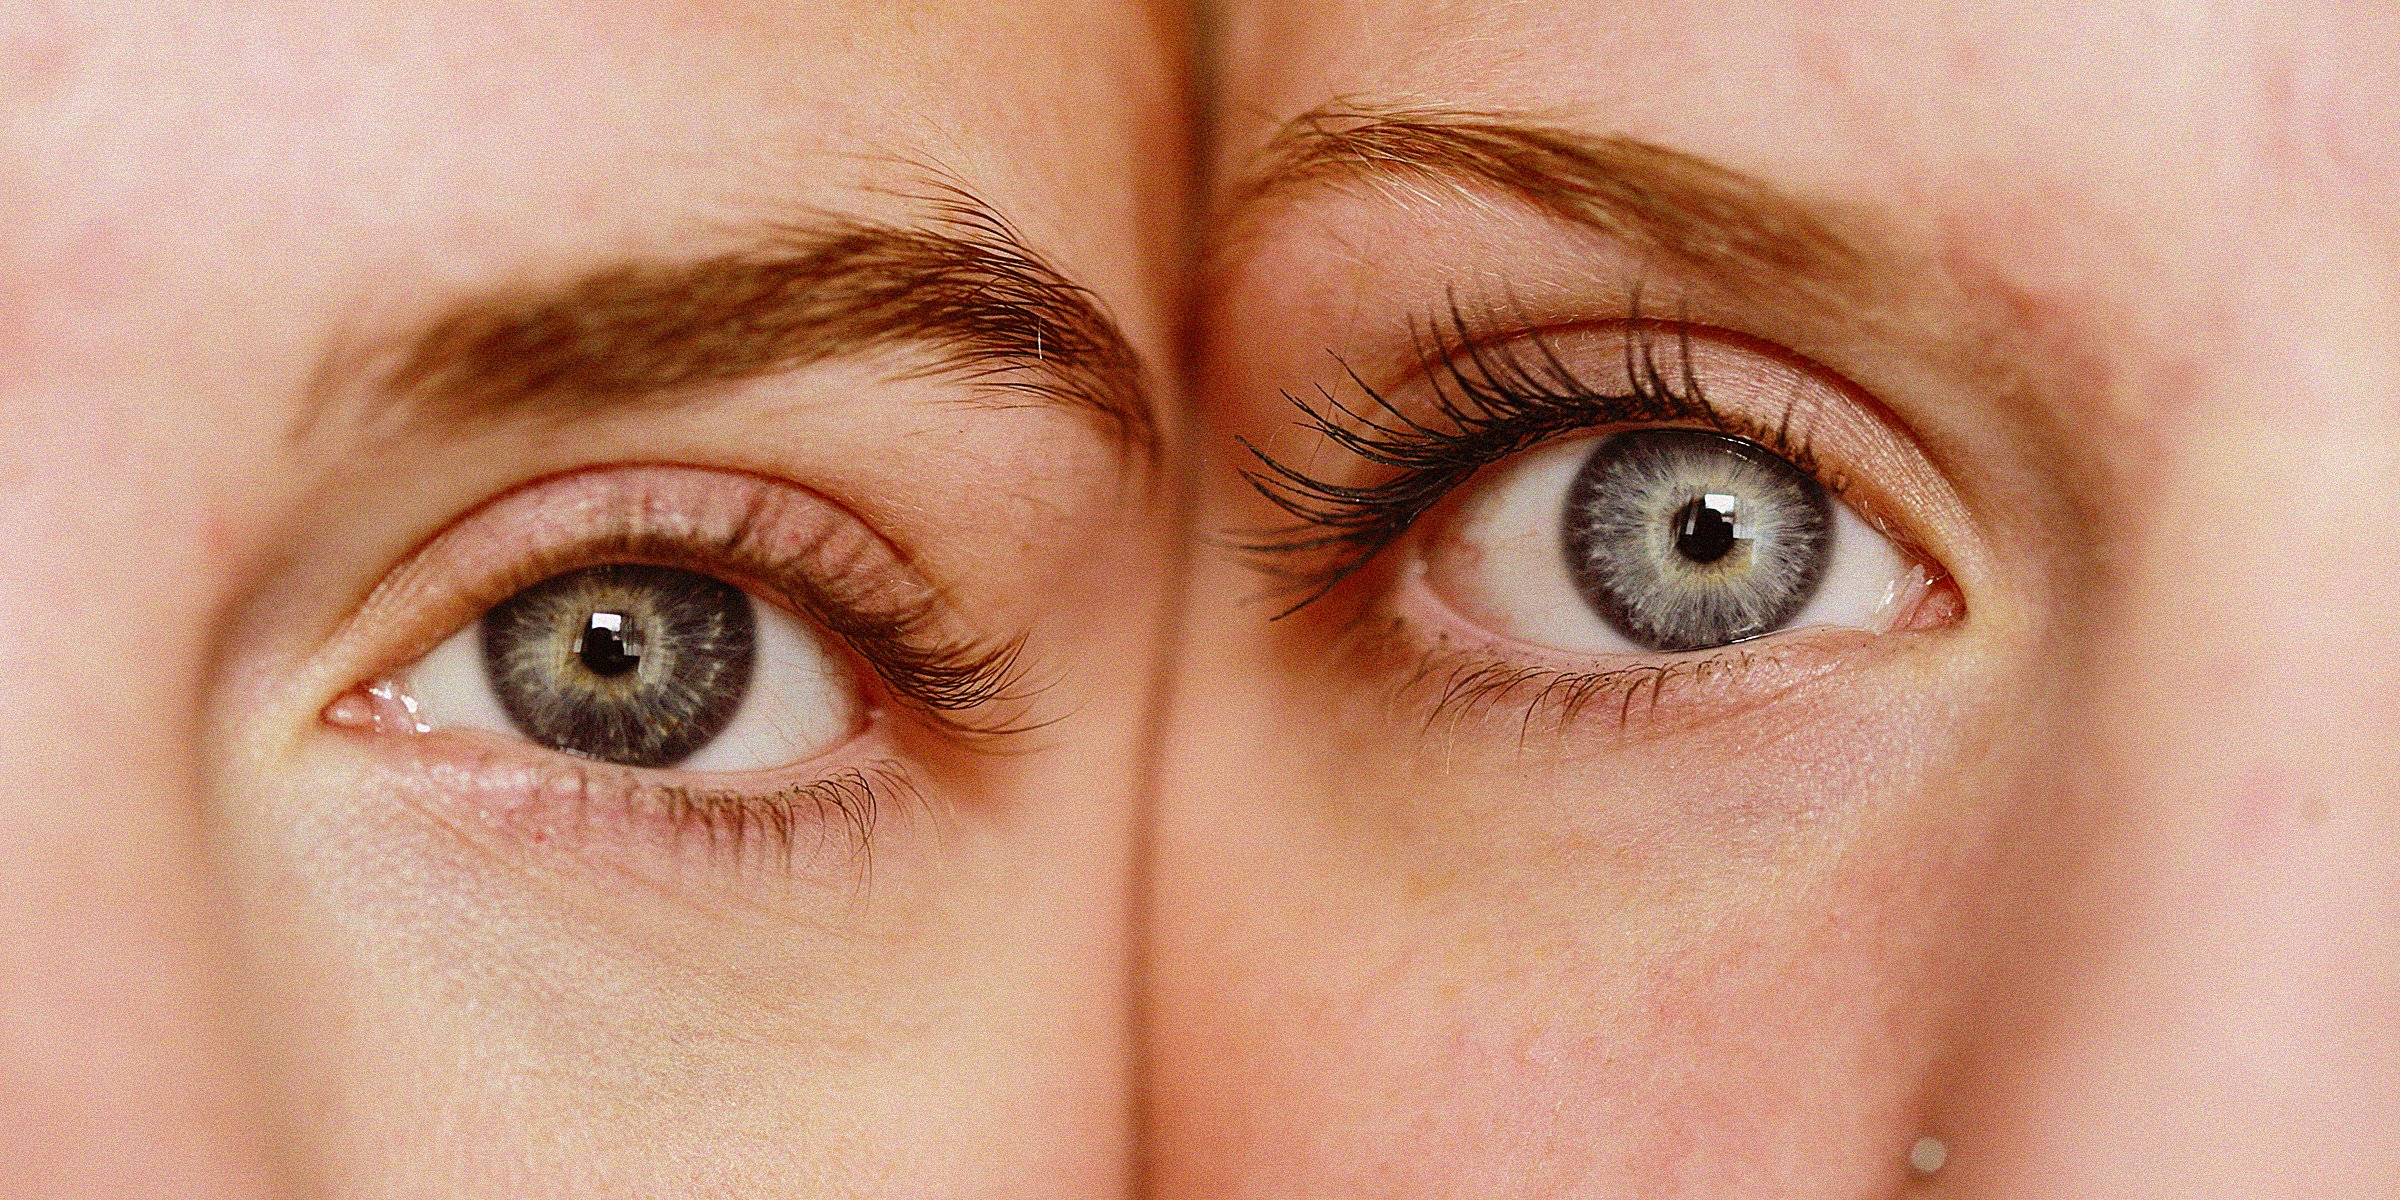 Unsplash | A close up of two individuals' one eye